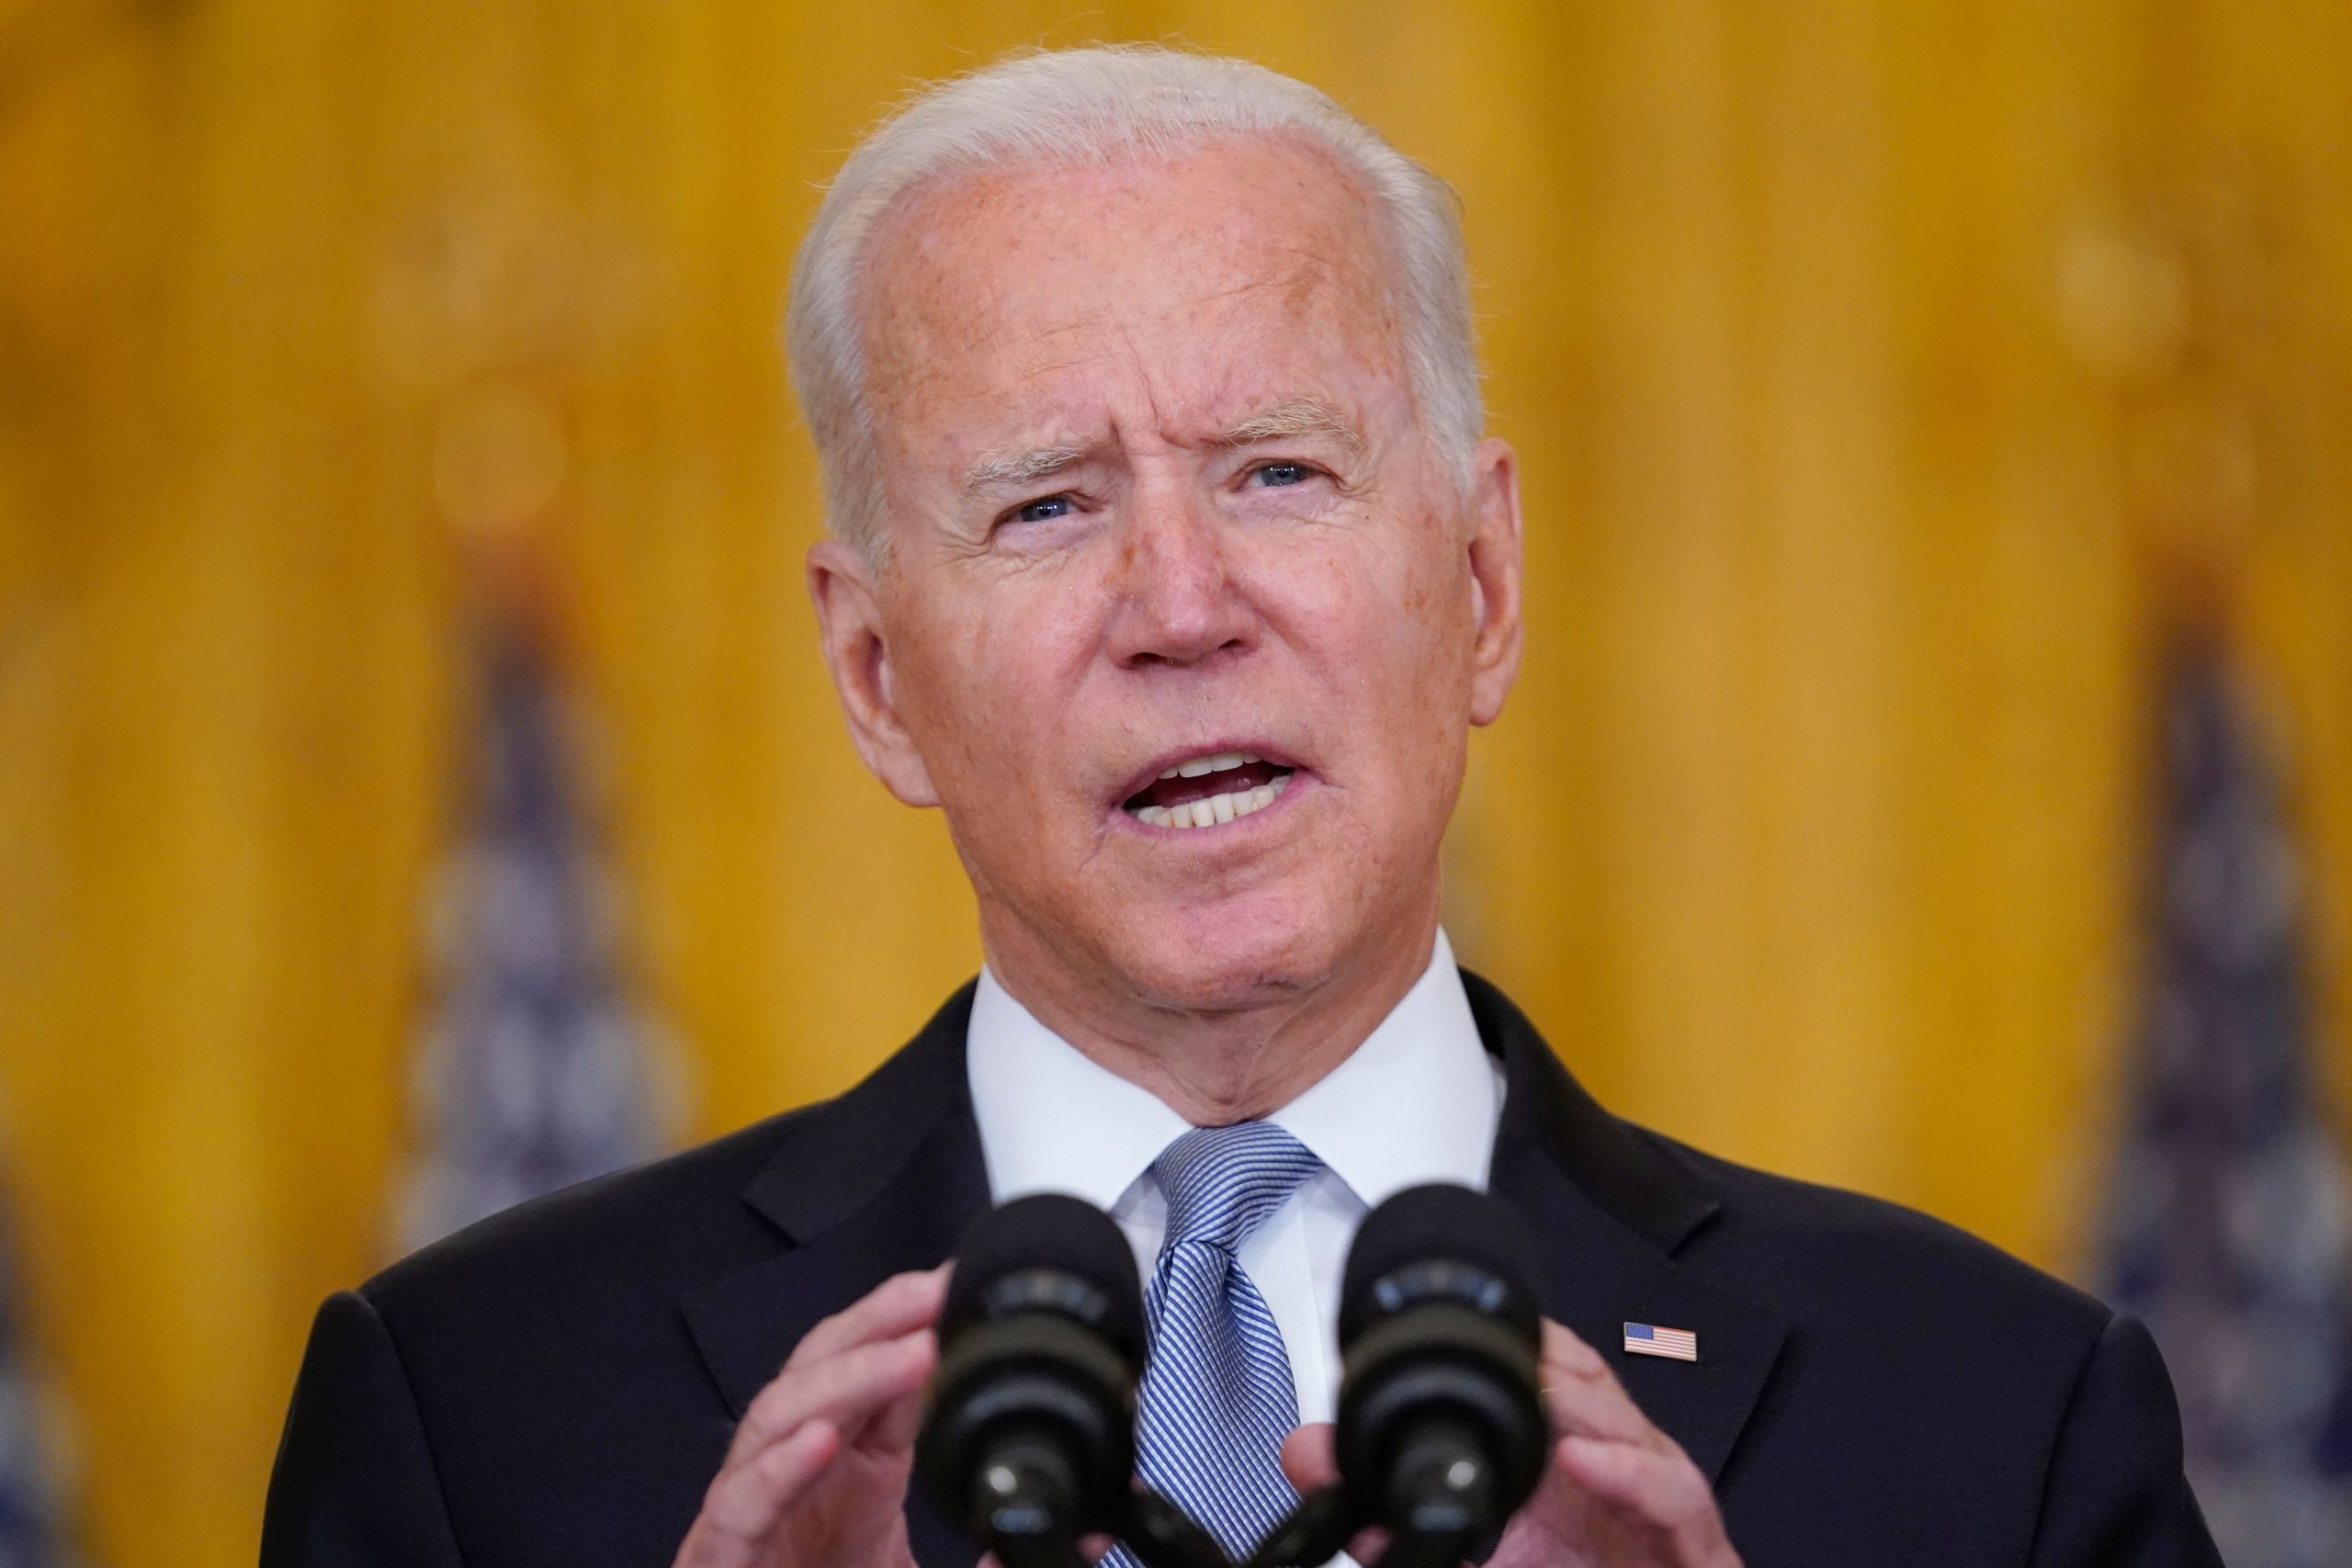 Federal bodies take steps to push voting rights after Biden’s executive order